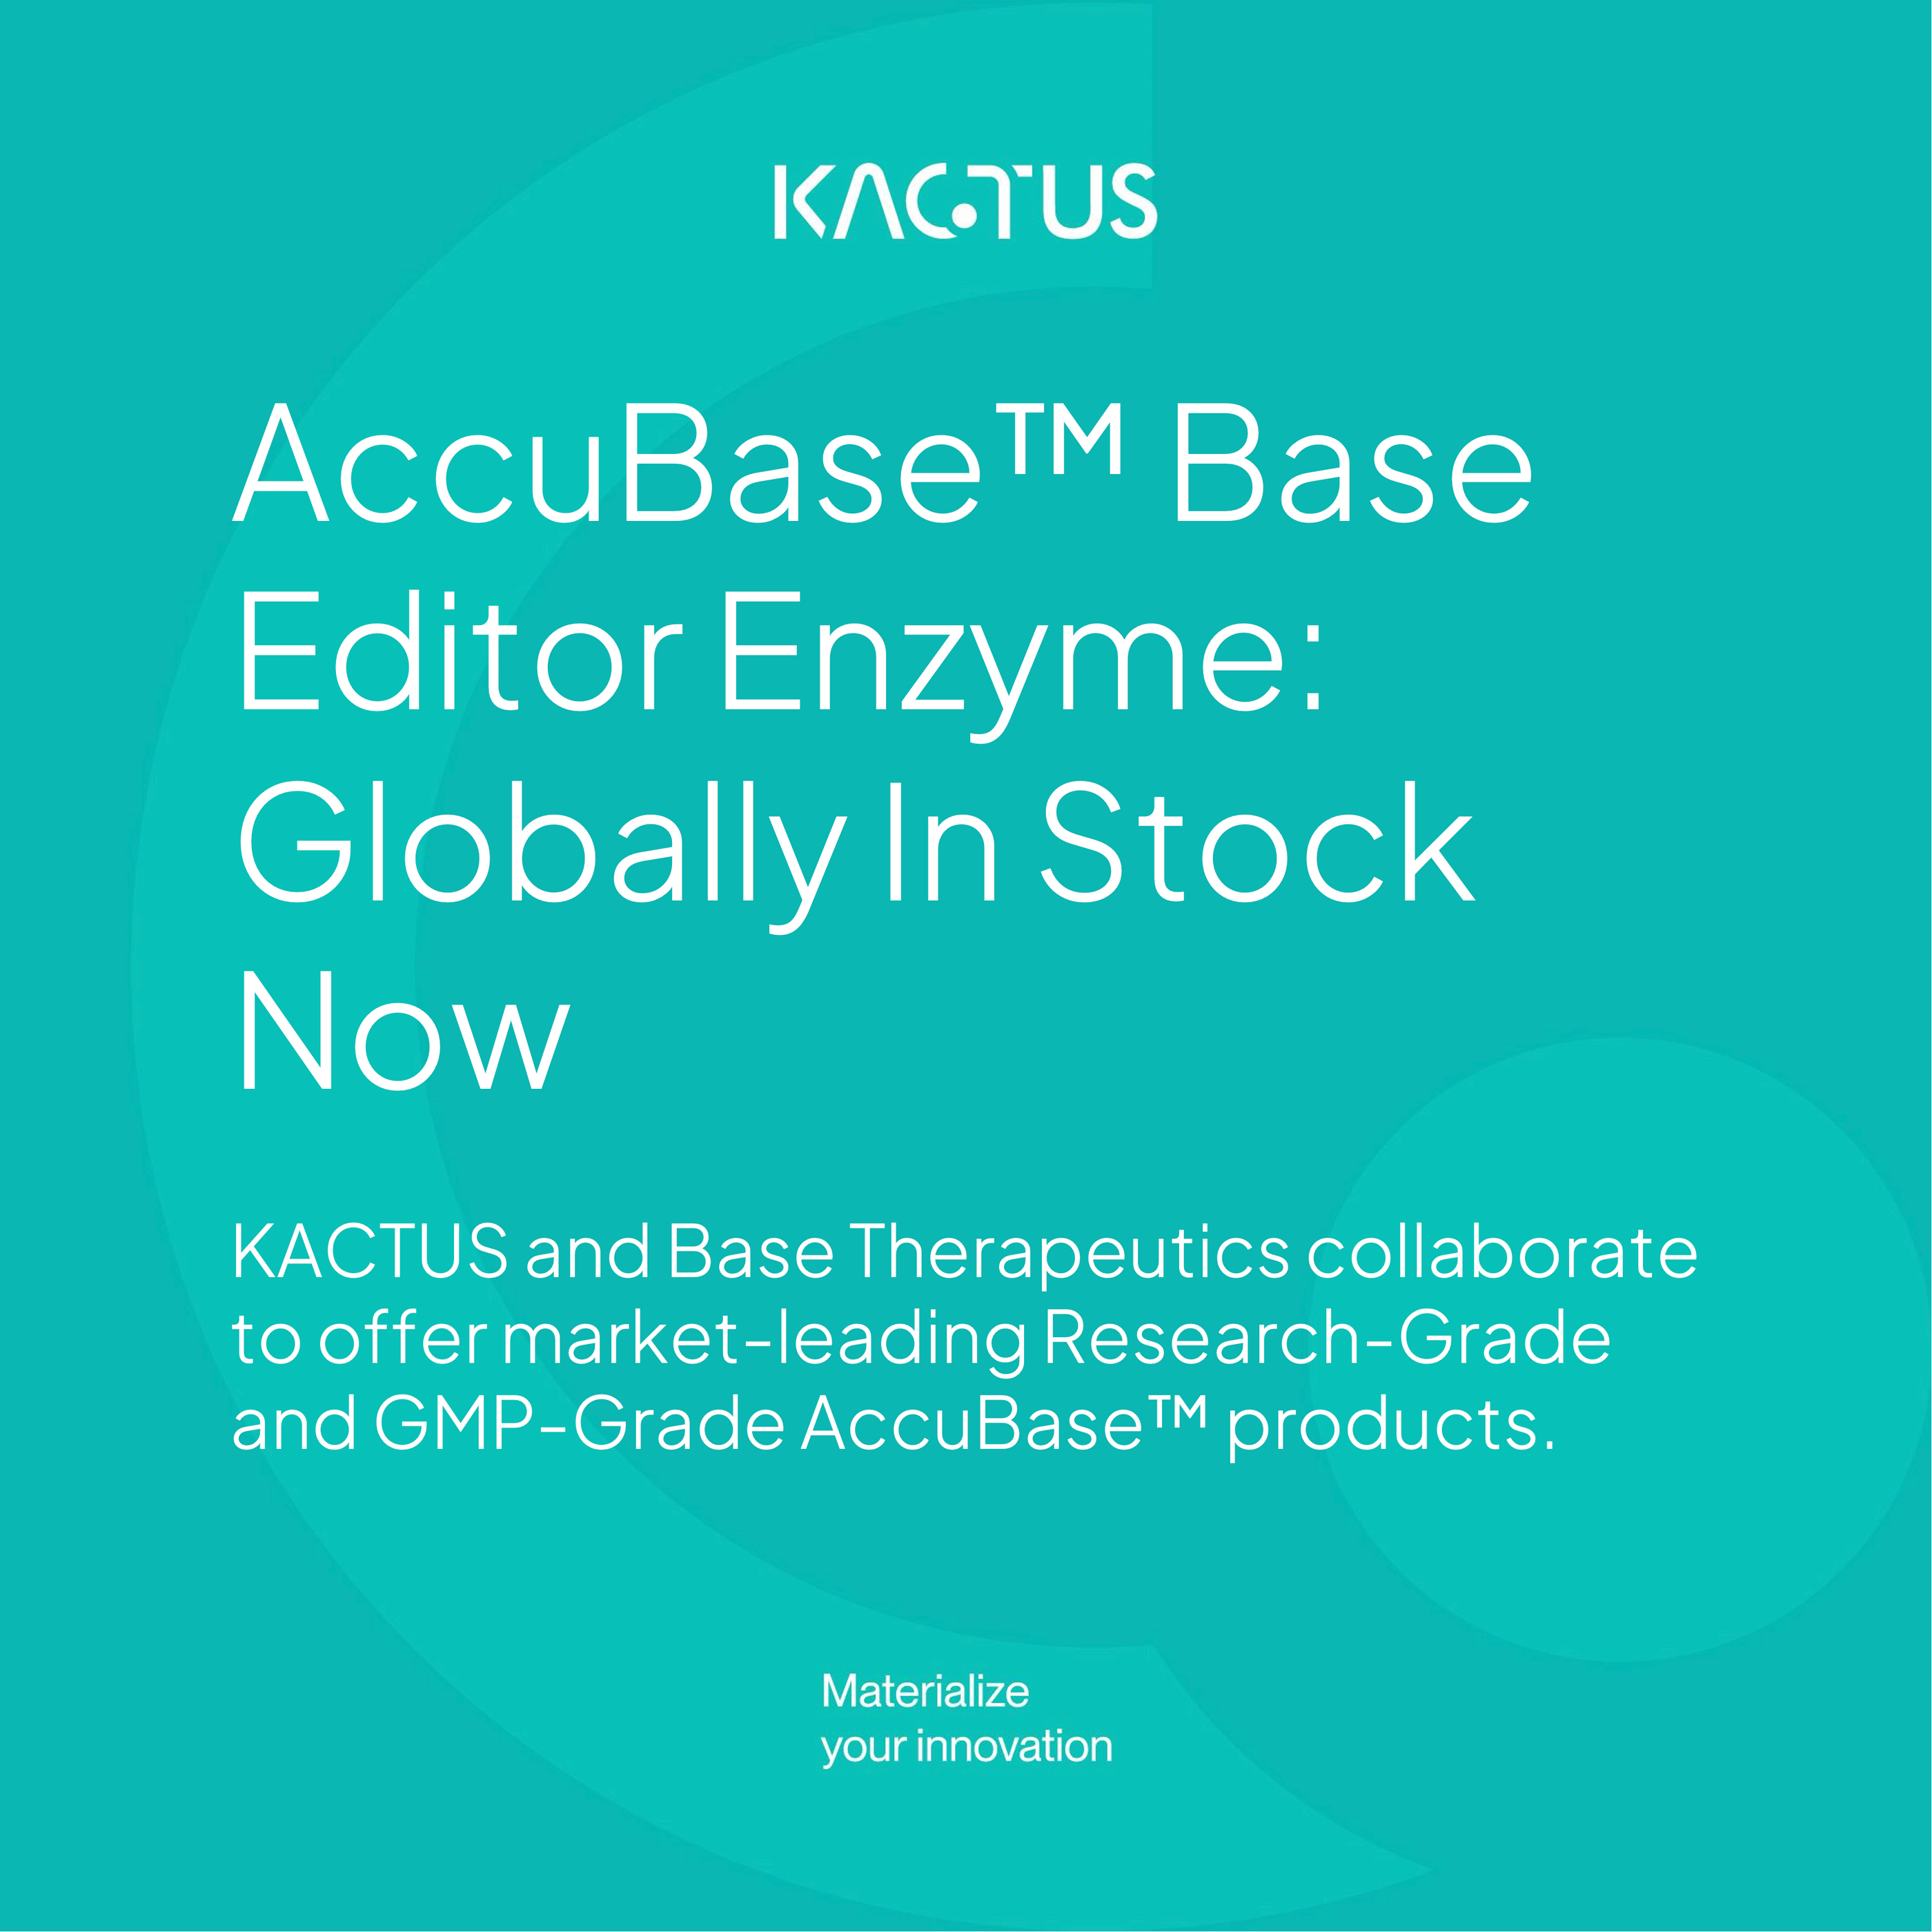 AccuBase™ Base Editor Enzyme: Globally In Stock Now